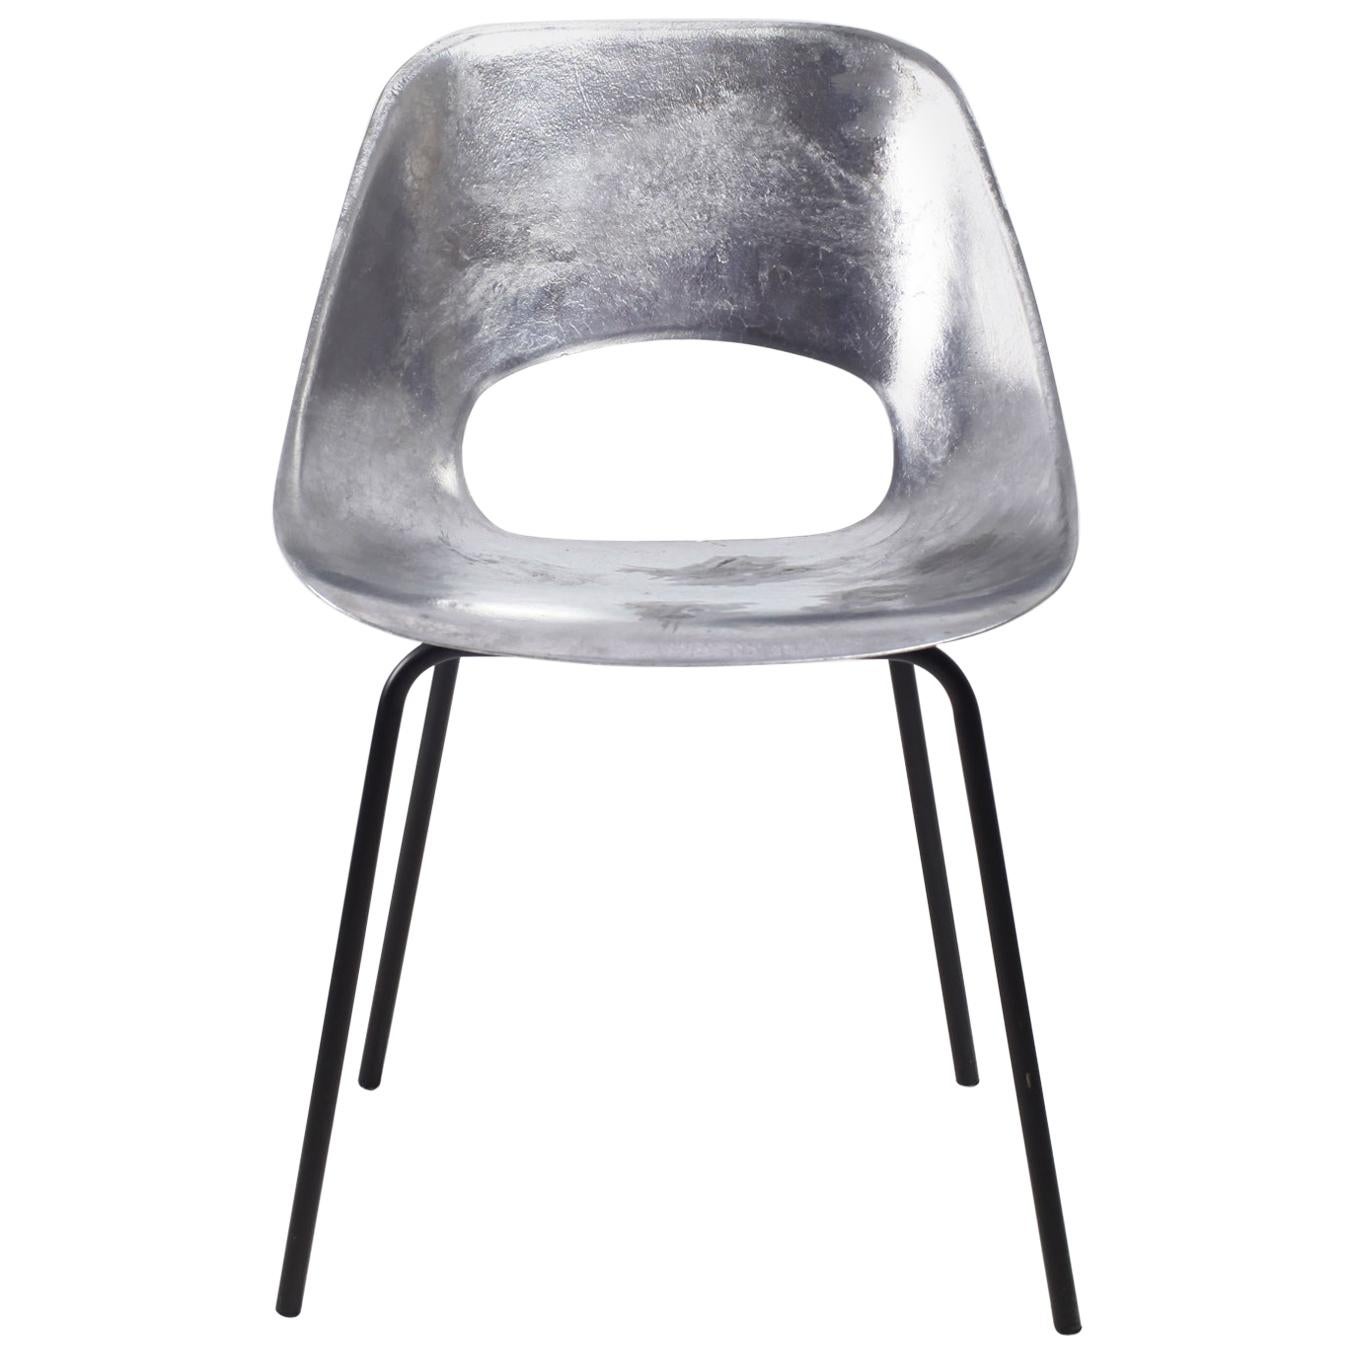 Early Pierre Guariche Aluminium Tulip Chair For Steiner, France, 1950